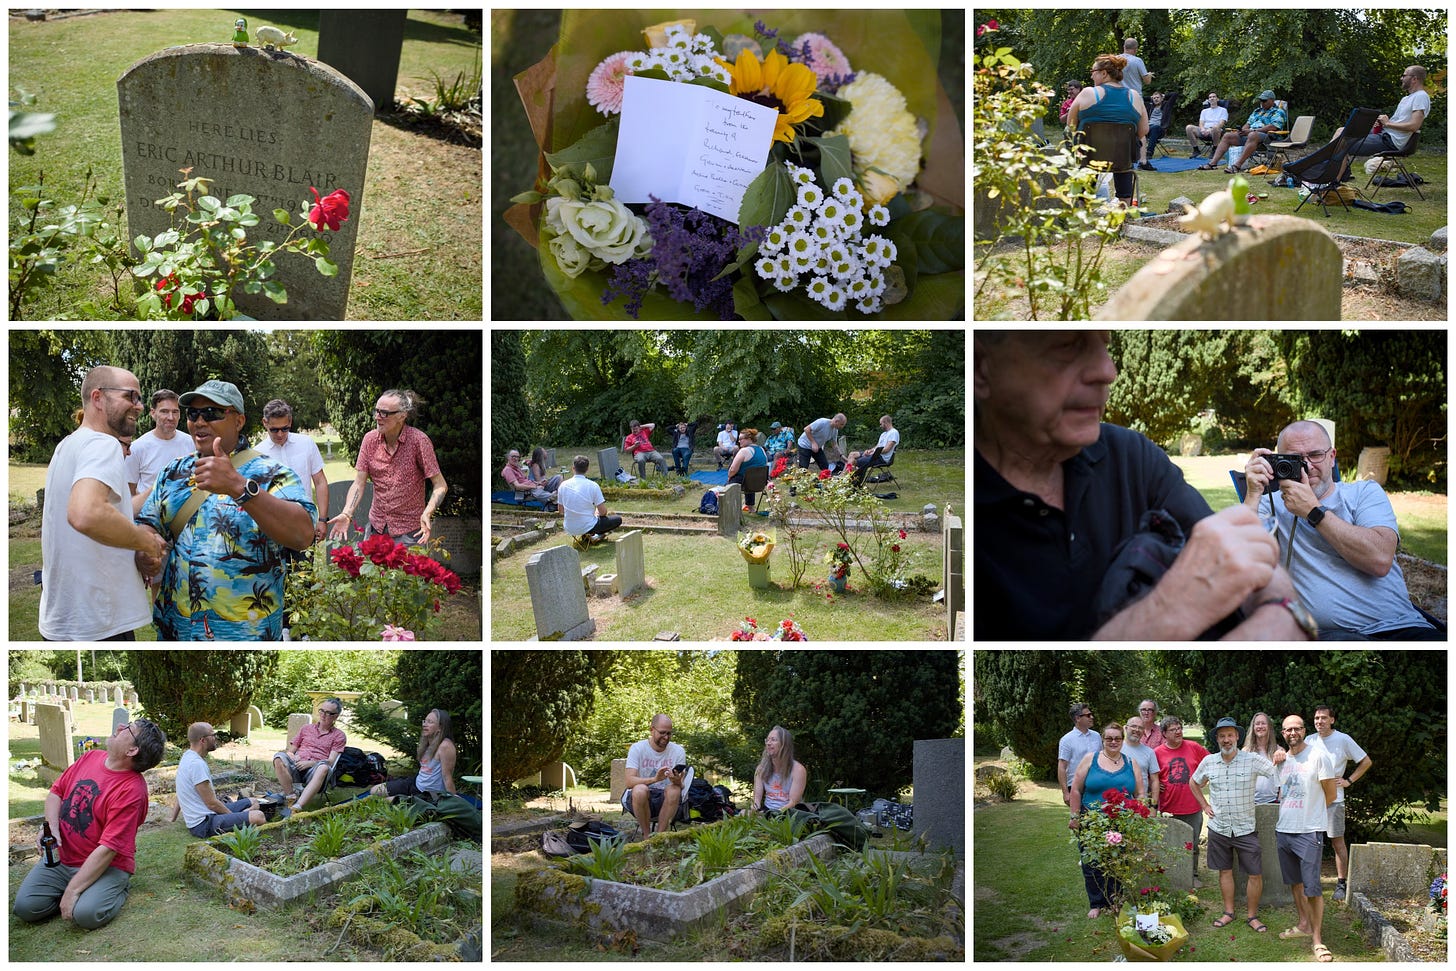 A montage of nine images of people chatting and enjoying each other's company in a graveyard.